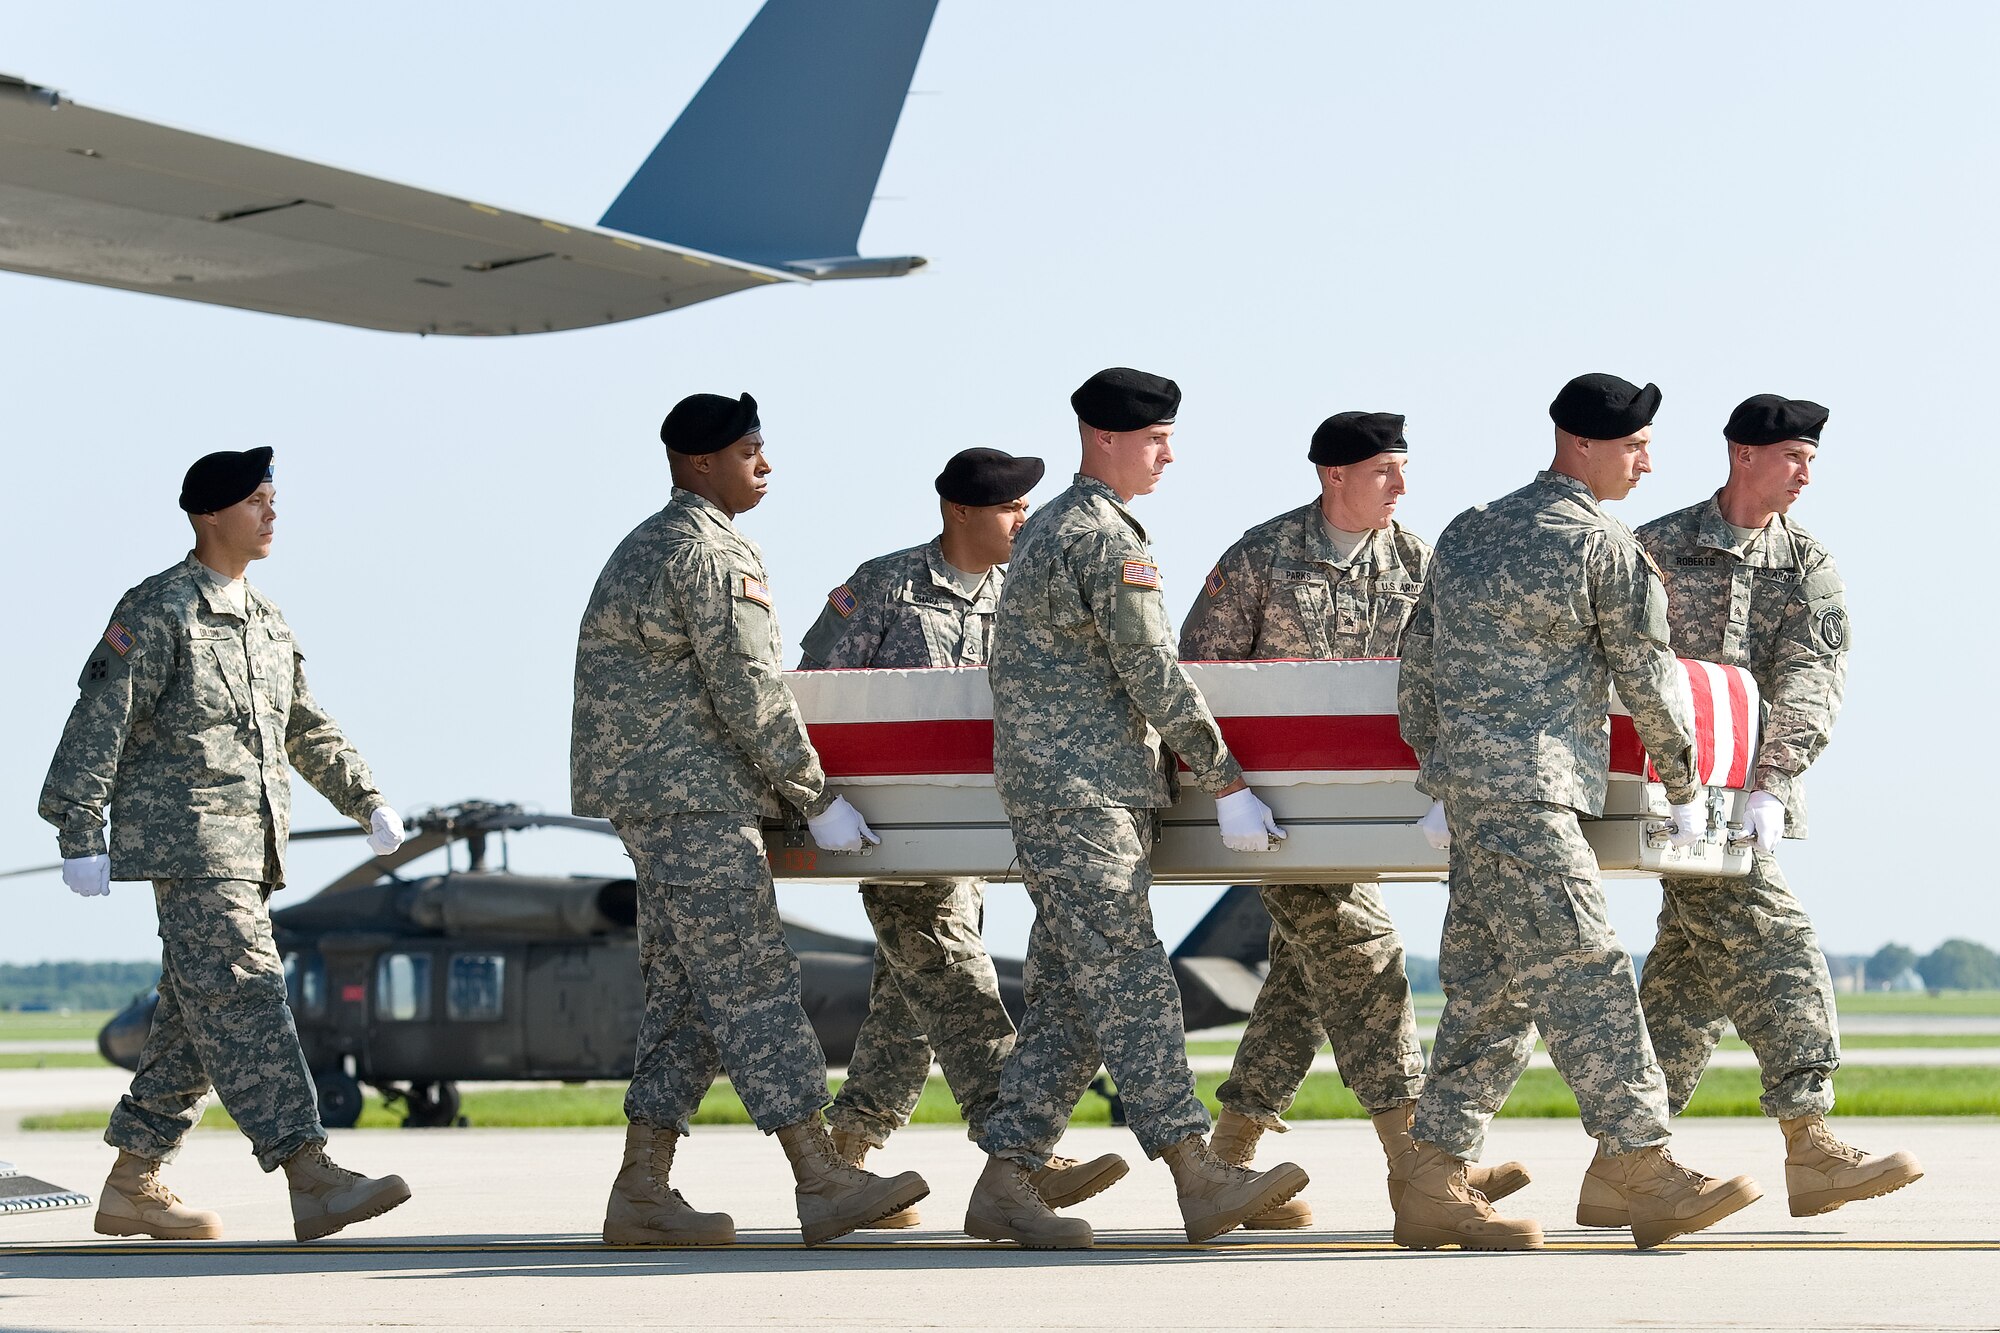 A U.S. Army carry team transfers the remains of Army Maj. Gen. Harold J. Greene of Schenectady, N.Y., Aug. 7, 2014 at Dover Air Force Base, Del. Greene was assigned to the Combined Security Transition Command, Afghanistan. (U.S. Air Force photo/Roland Balik)